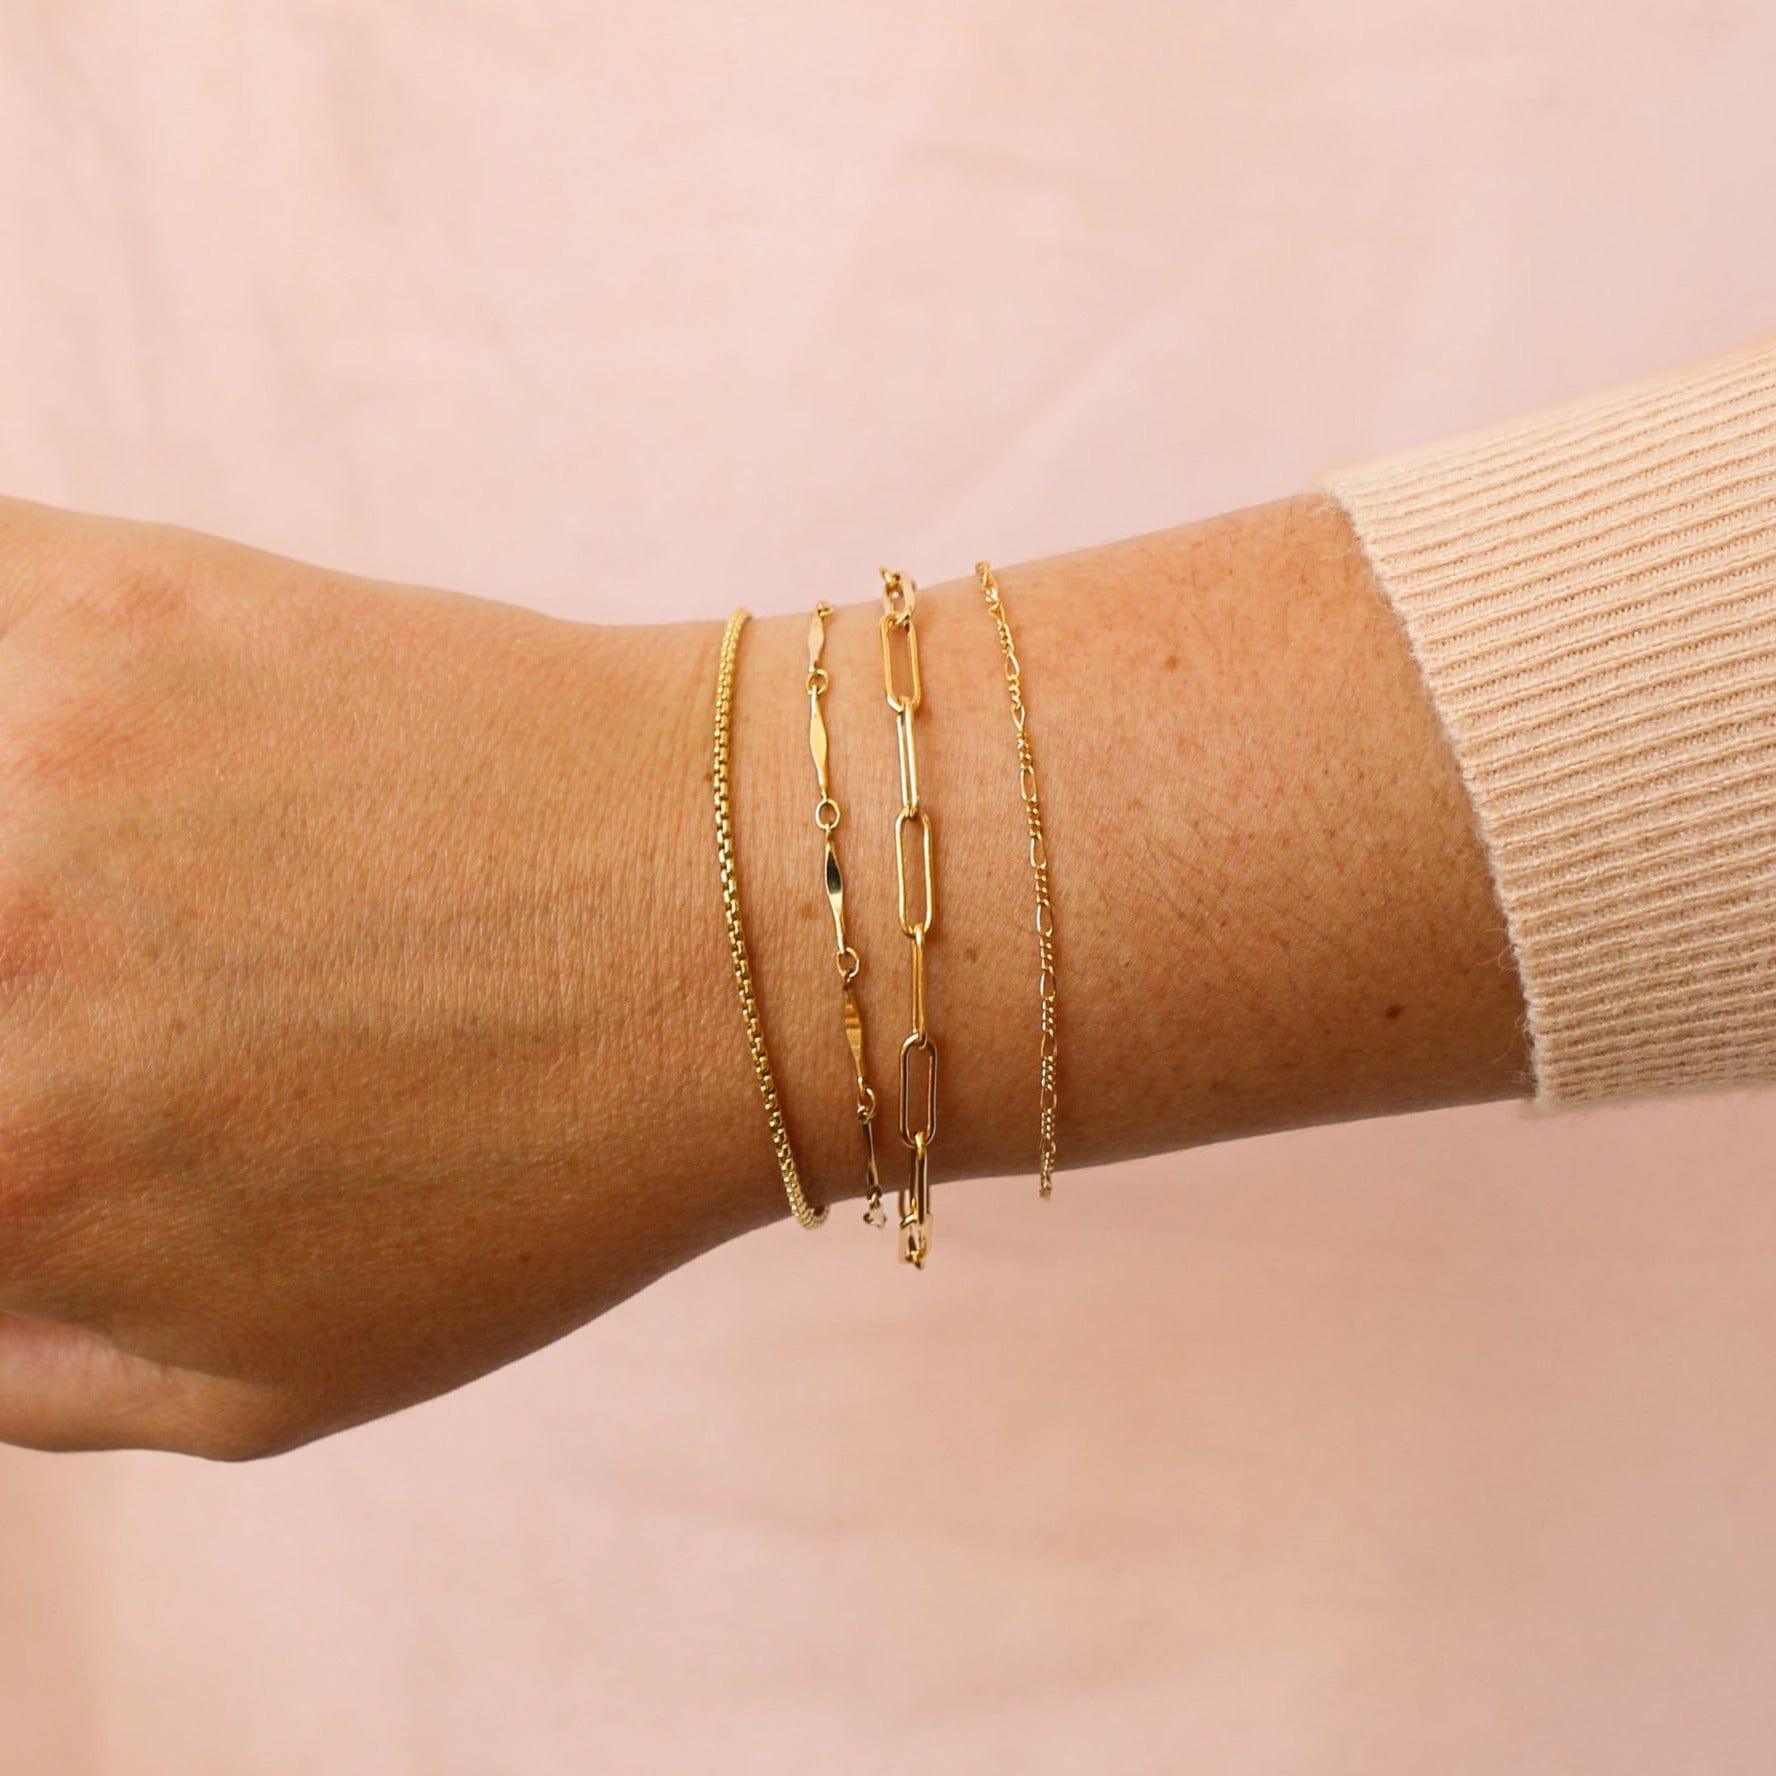 Parker Bar Bracelet - Nolia Jewelry - Meaningful + Sustainably Handcrafted Jewelry